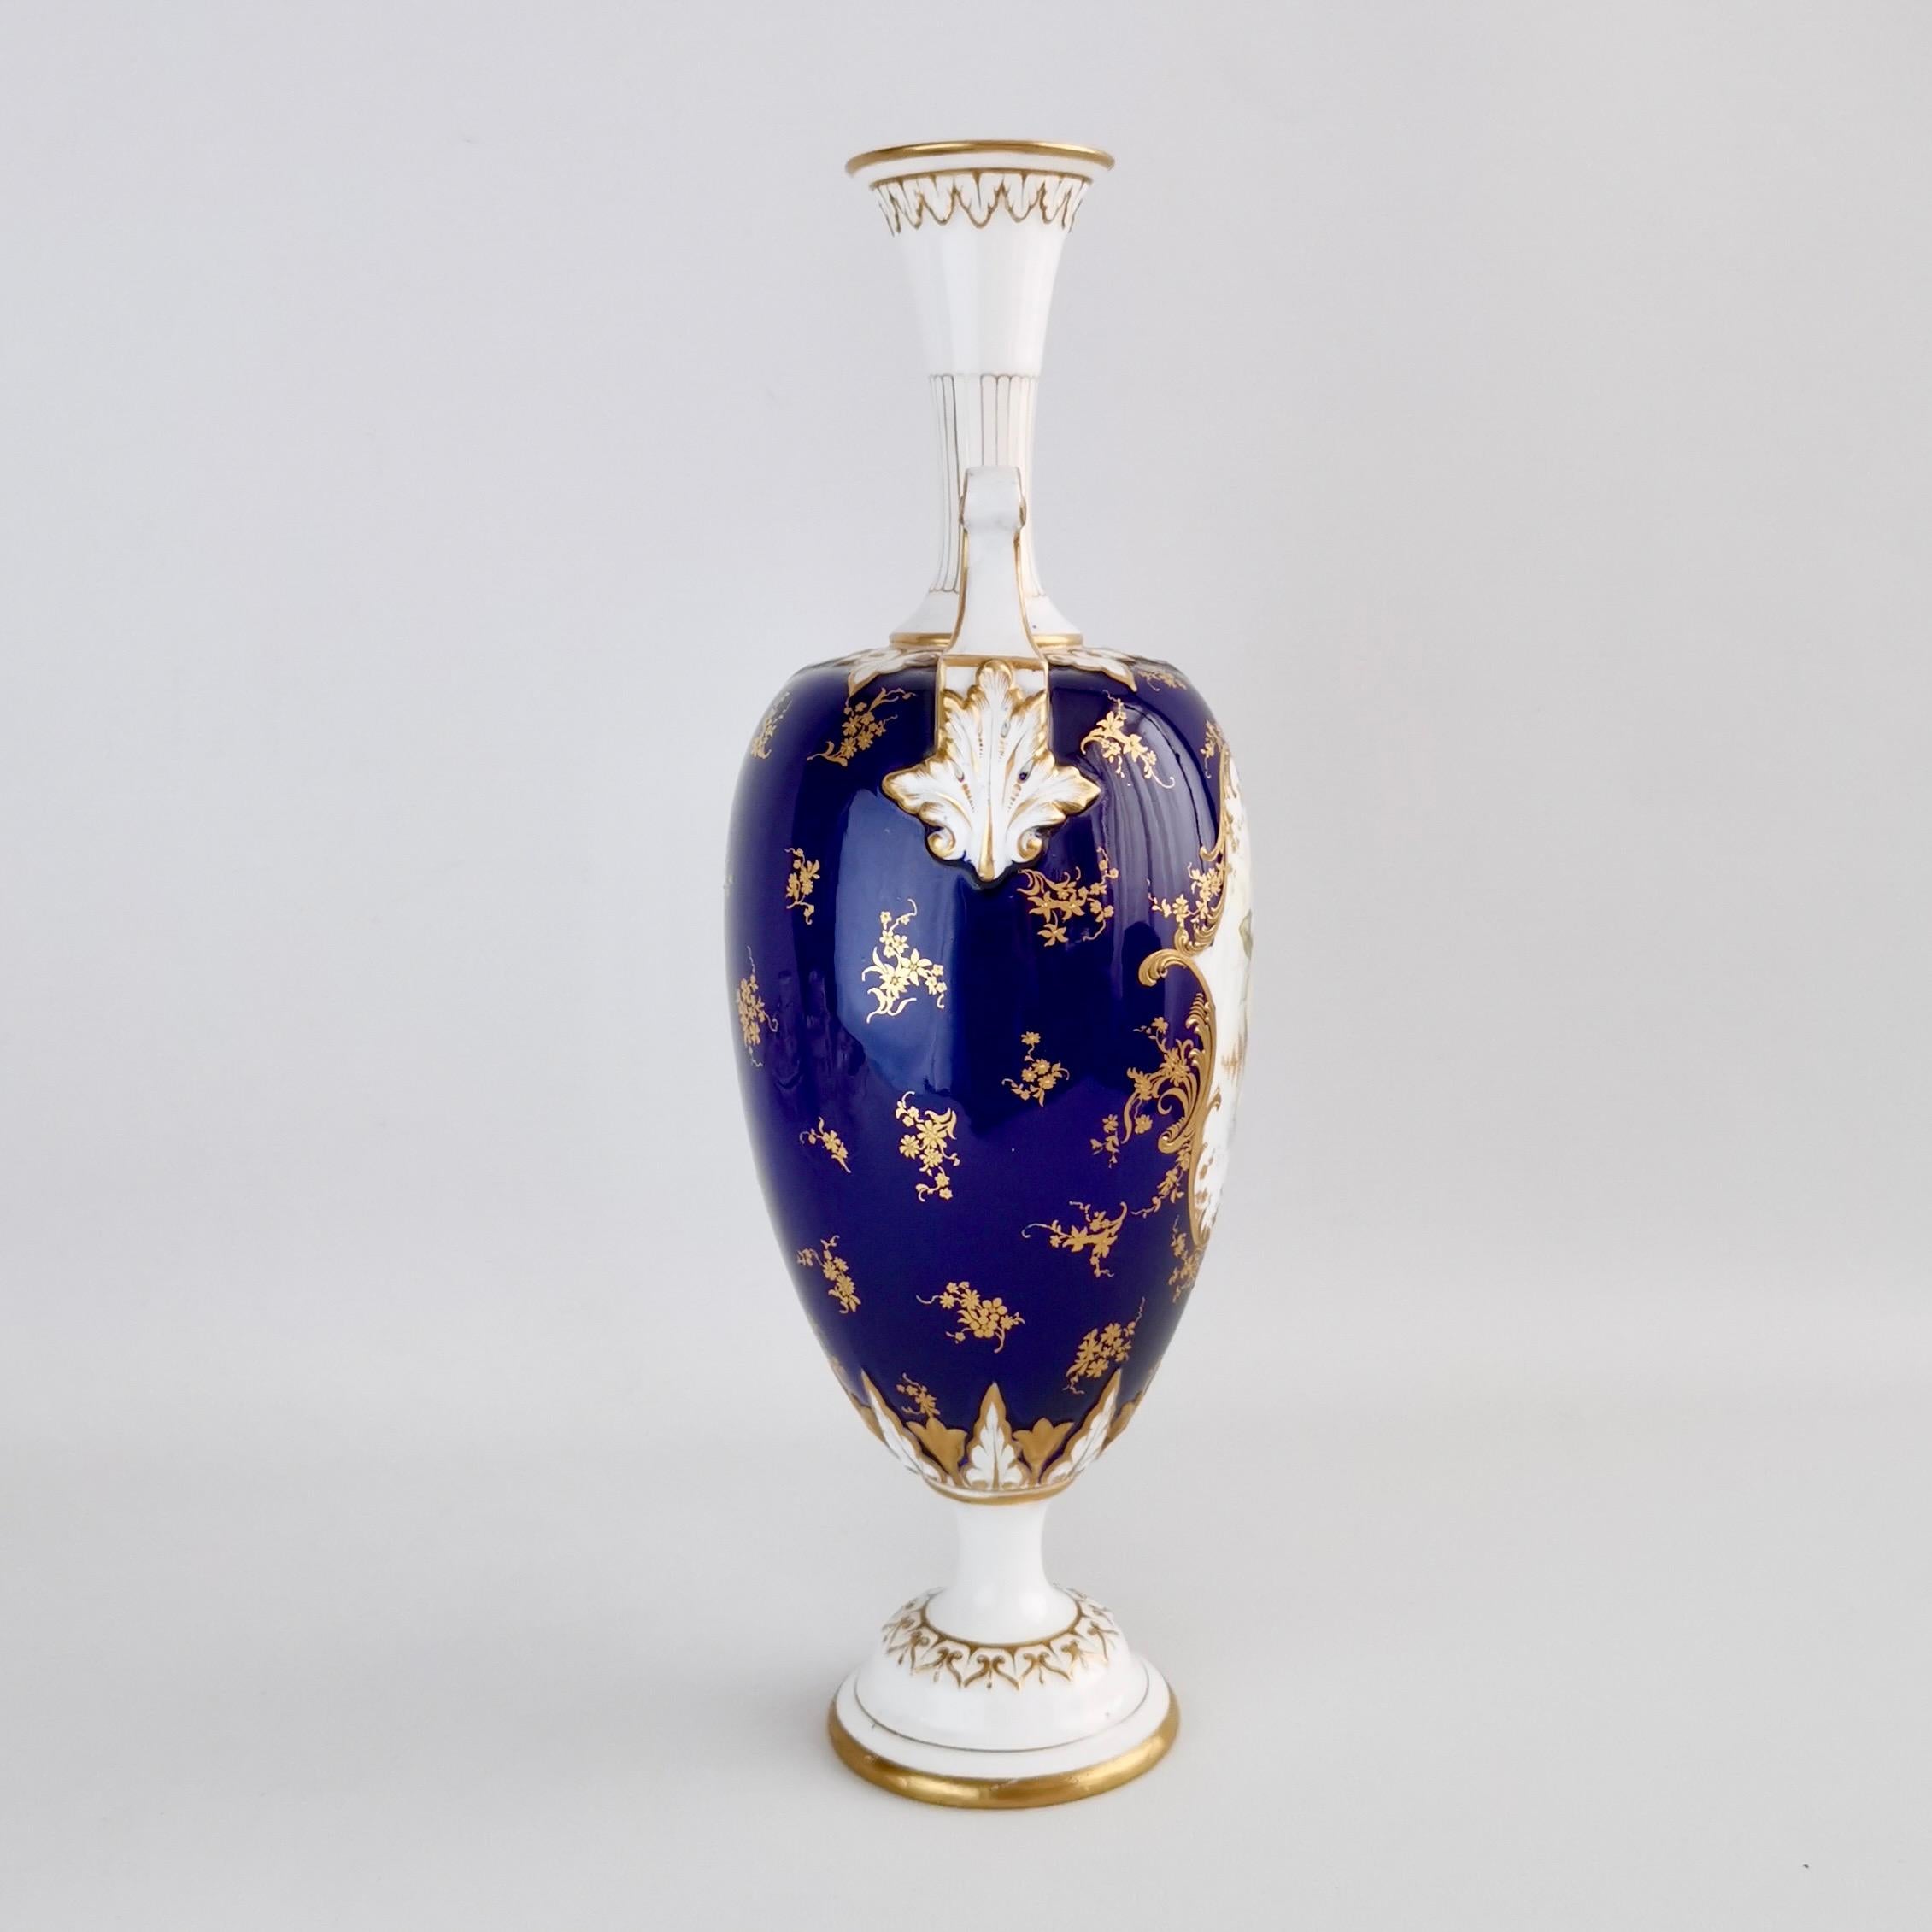 This is a beautiful vase made by Royal Worcester in 1901, painted with fruits and flowers and signed by the famous porcelain artist William Hawkins.

The original Worcester factory was founded in the mid 18th Century and belongs to the group of